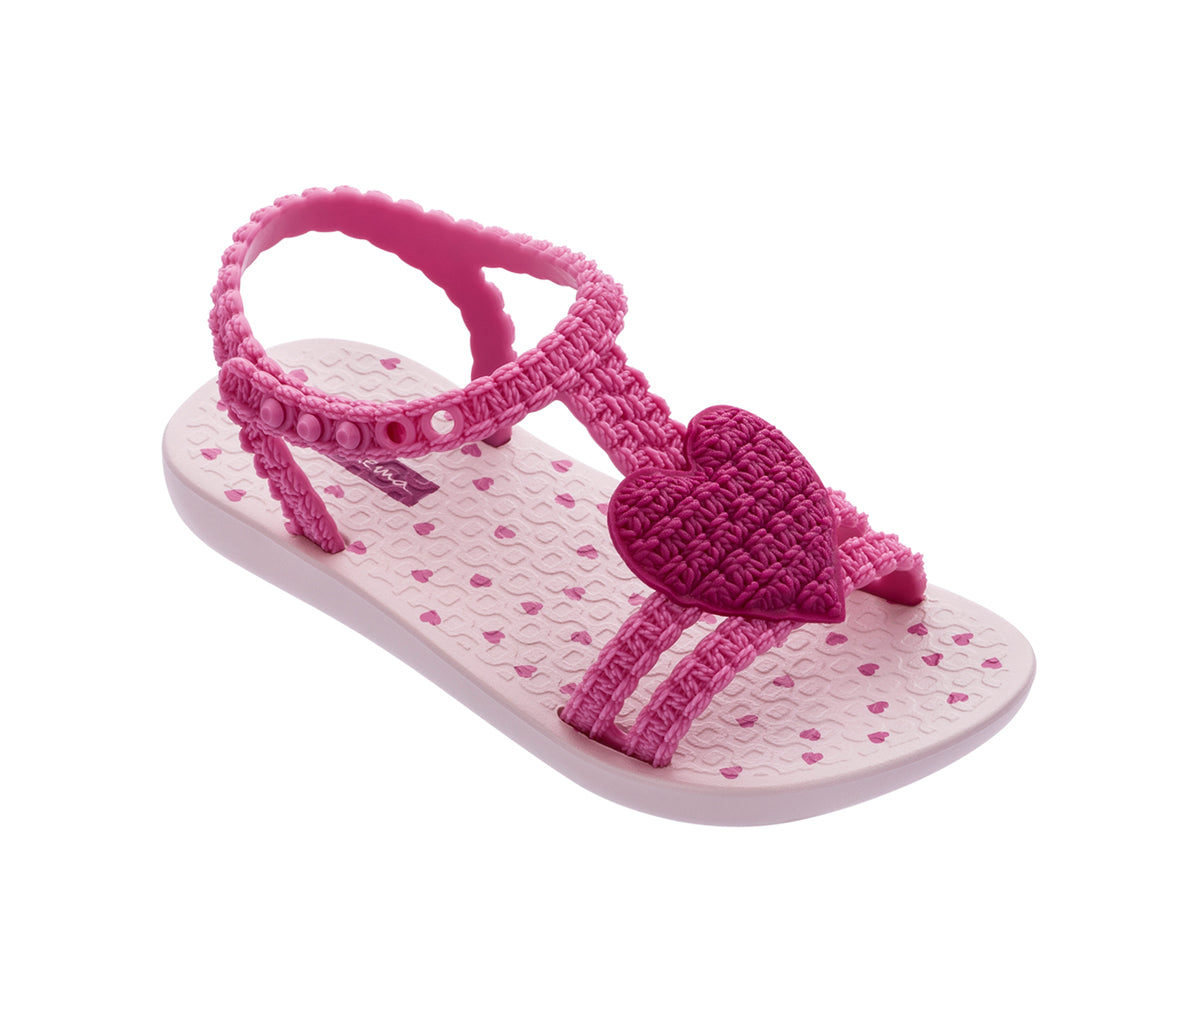 Angled view of a pink My First Ipanema Sandal with straps and a crochet heart on top.